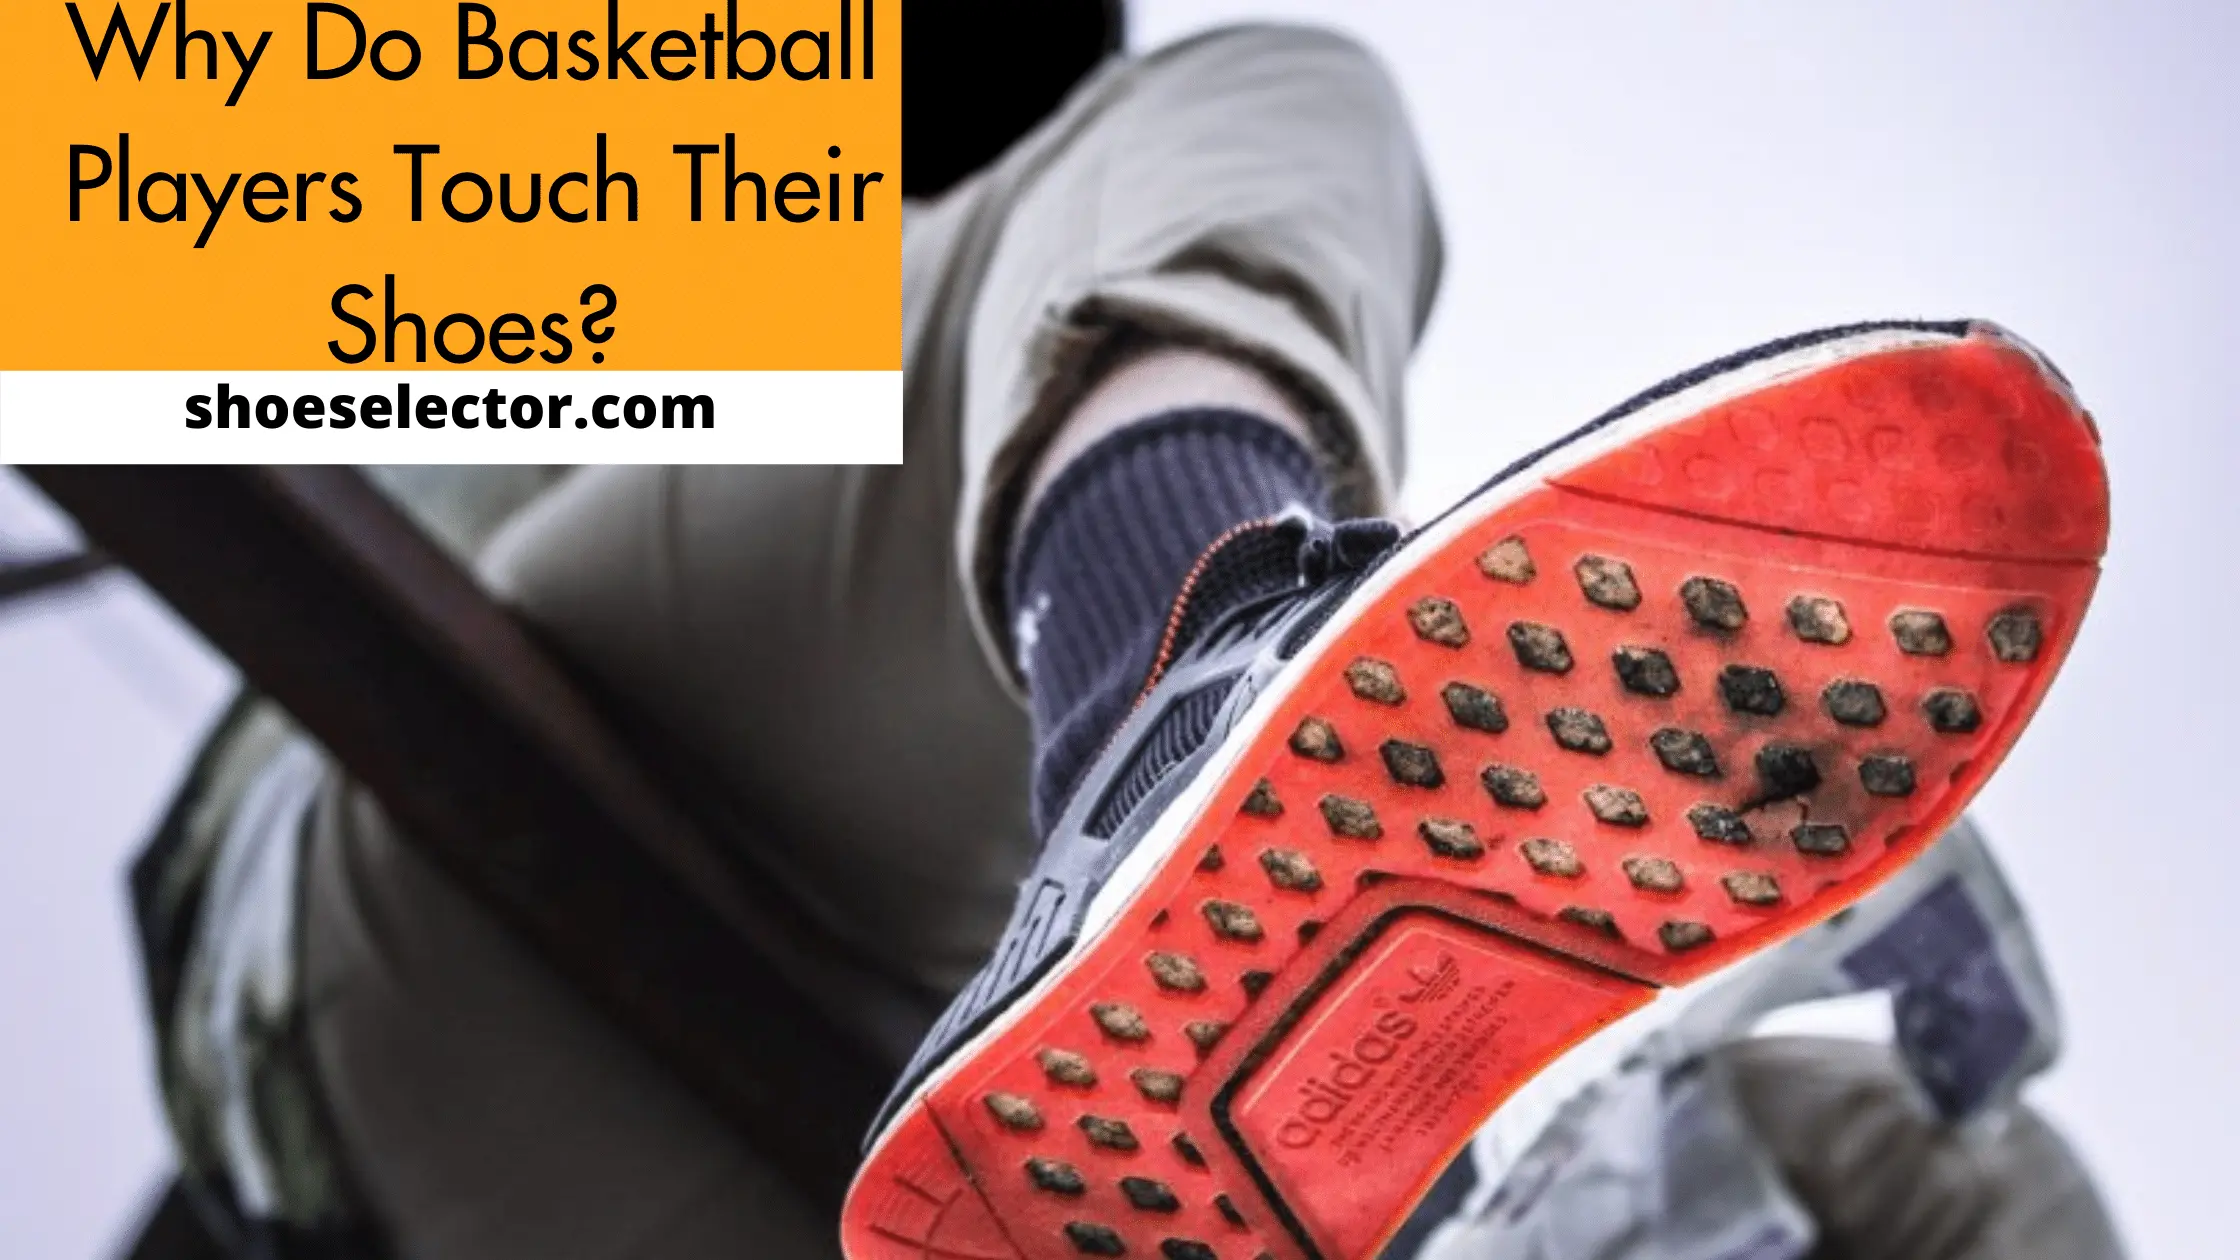 Why do Basketball Players Touch Their Shoes? - #1 Solution